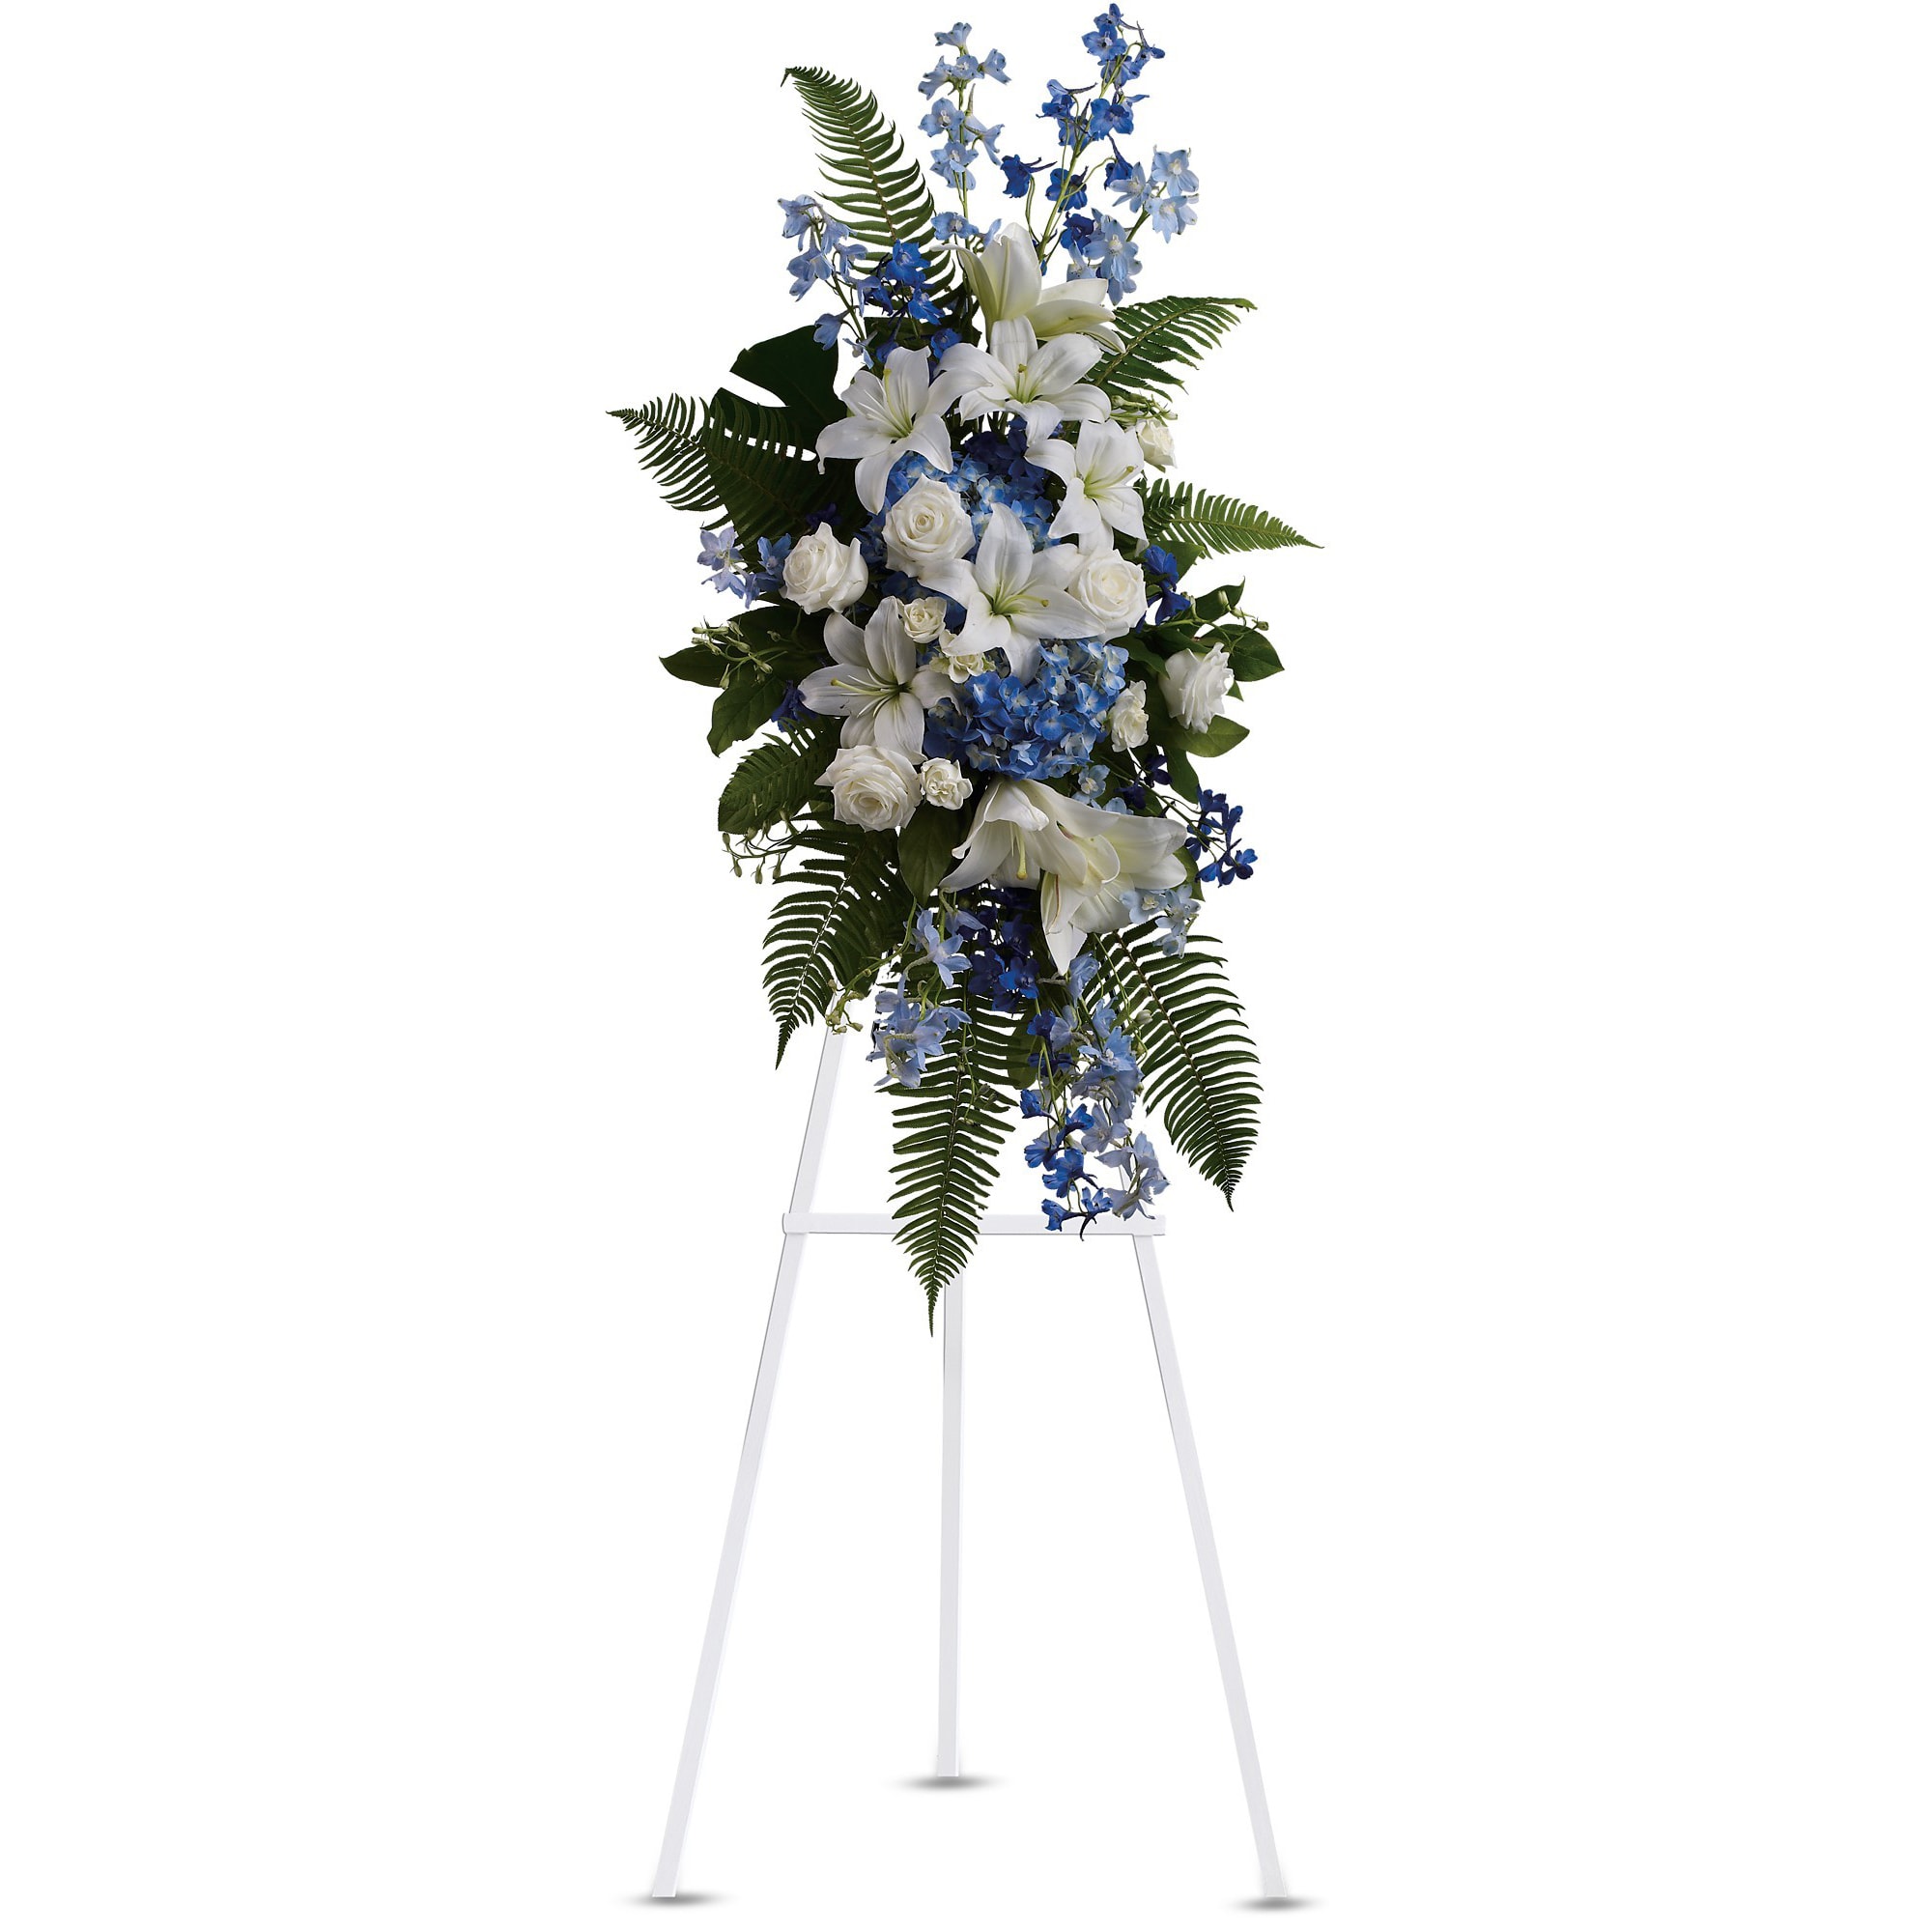 Ocean Breeze Spray - Express deep condolences and strong hopes for the future with an elegant tribute that conveys admiration, affection and respect. 